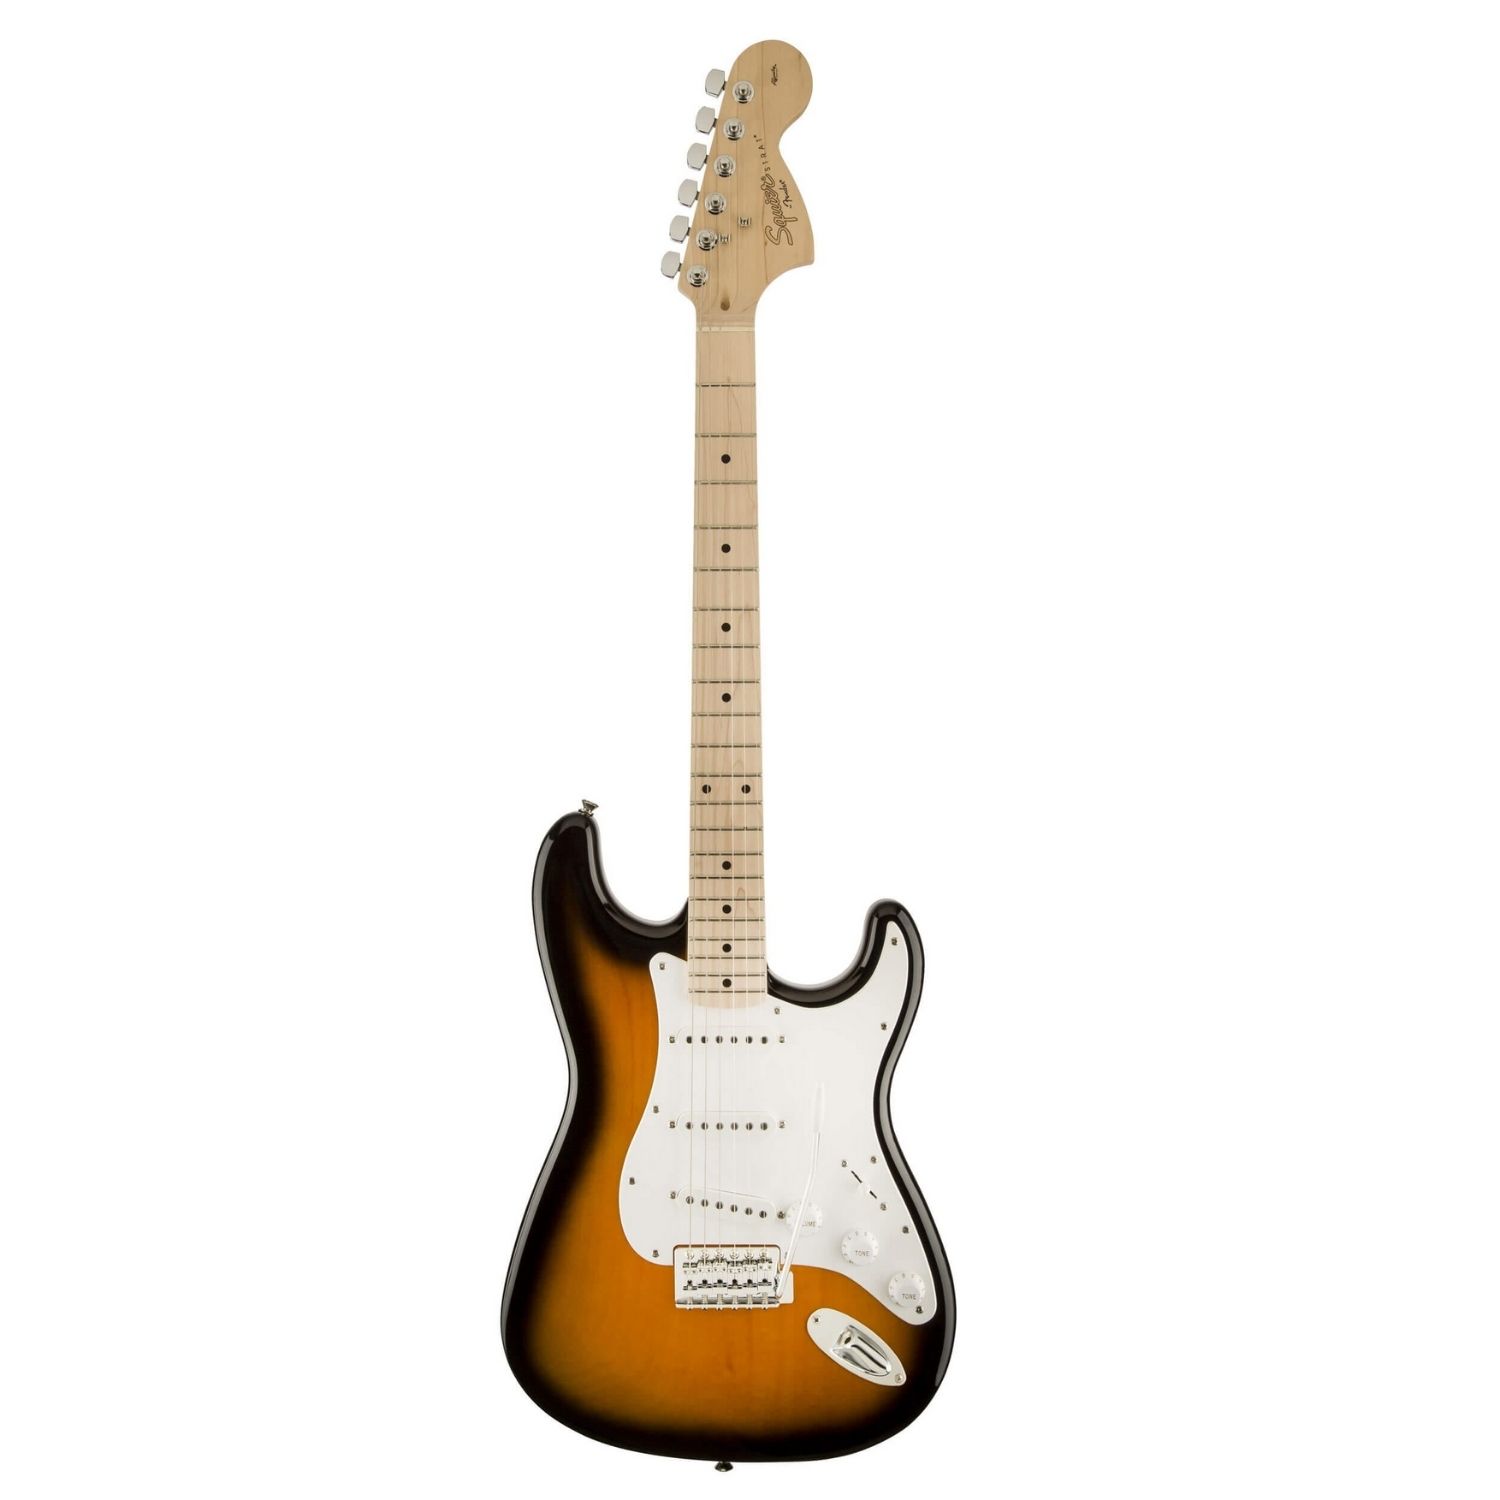 Fender Squier Affinity Electric Guitar online price in India